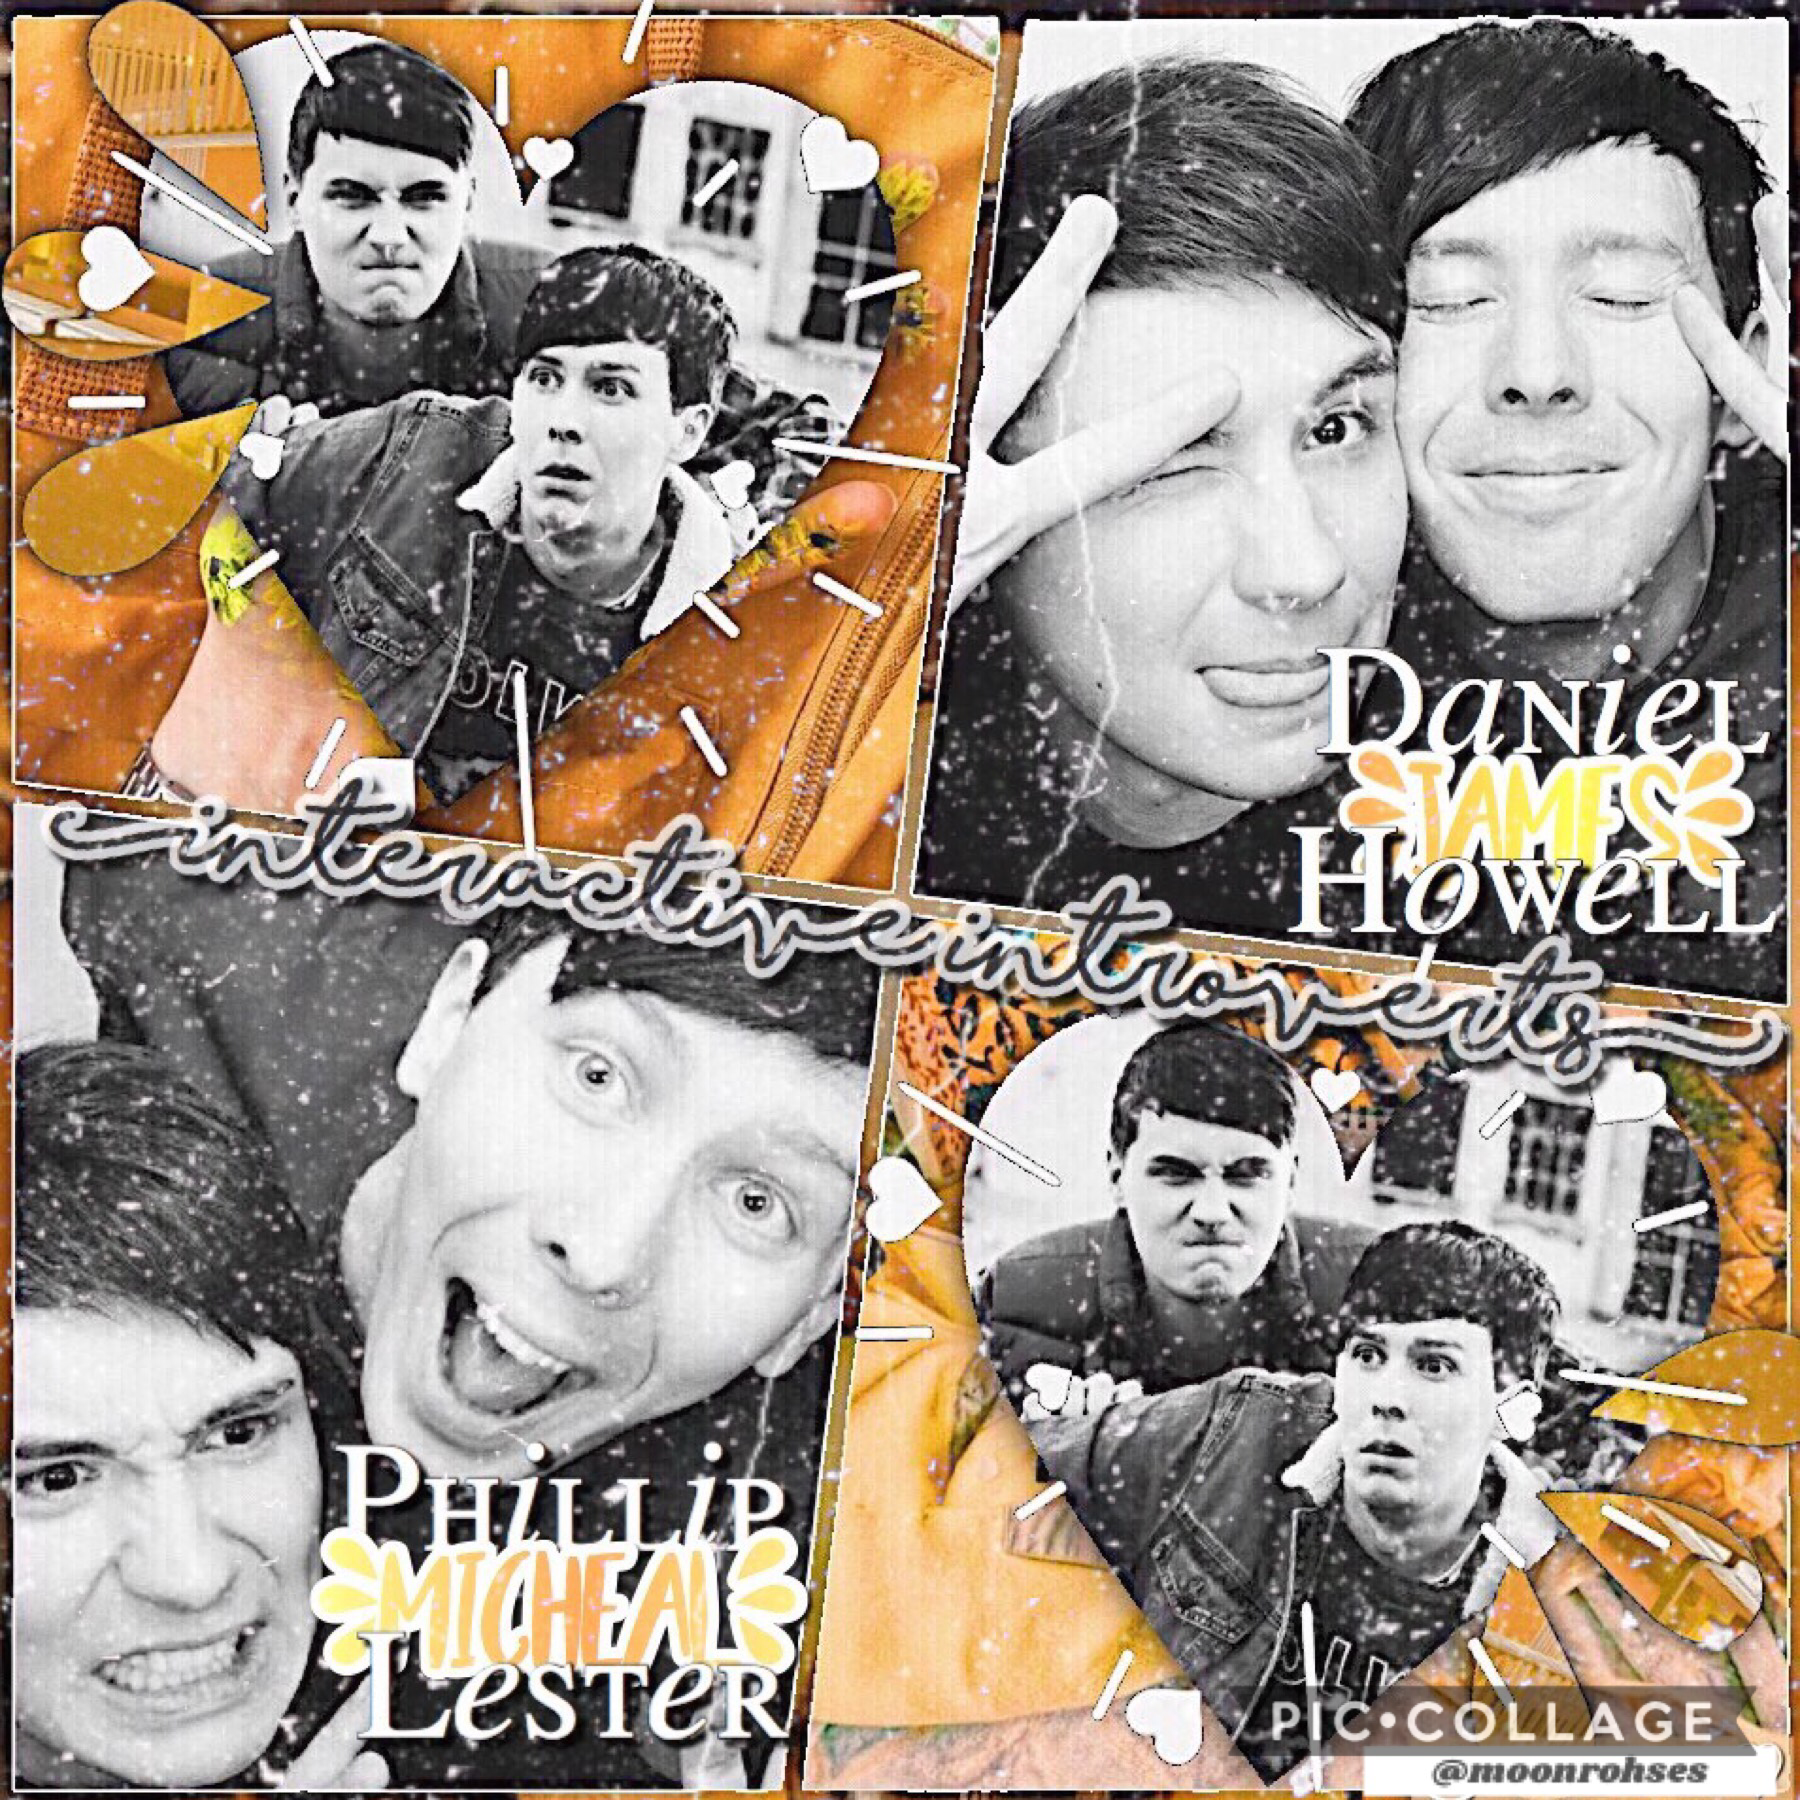 🧡 t a p 🧡

Danny and Philly!

Rate ?/10

Any feedback would be greatly appreciated💕